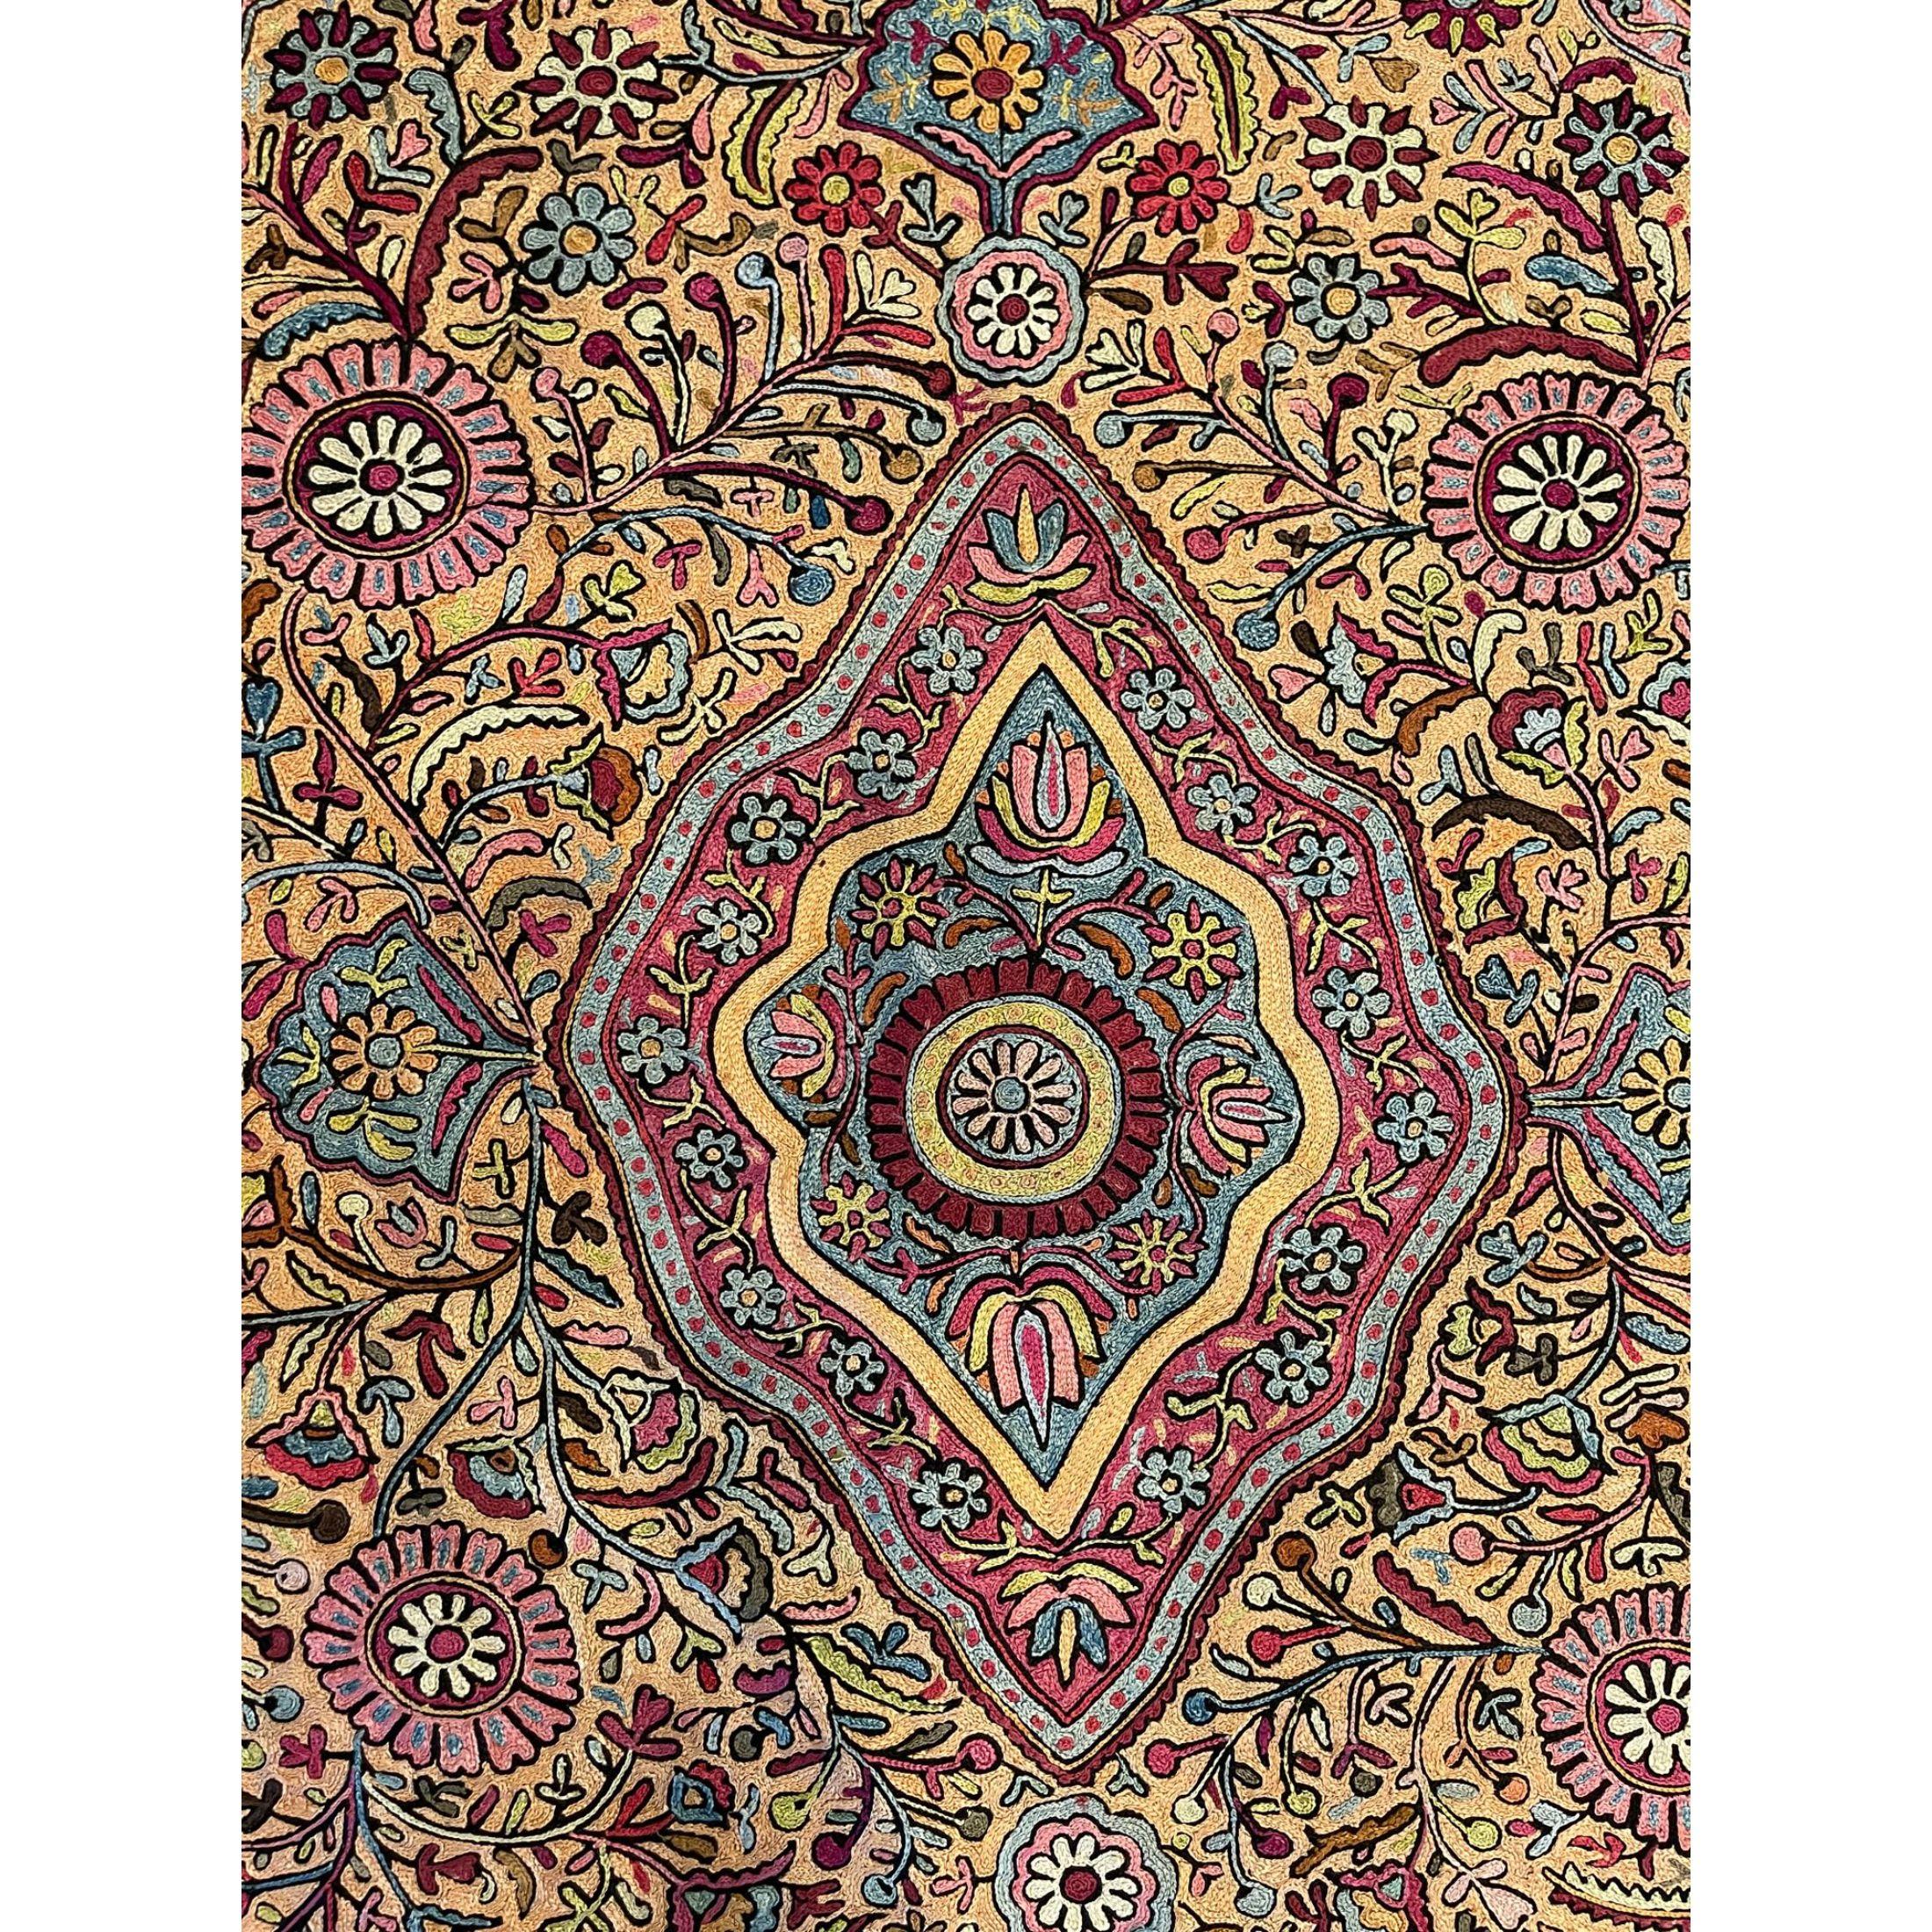 A Kashmir rug is a hand-knotted oriental rug from Kashmir valley in India, which is associated with Kashmiri handicrafts. Kashmir rugs or carpets have intricate designs that are primarily oriental, floral style in a range of colors, sizes and